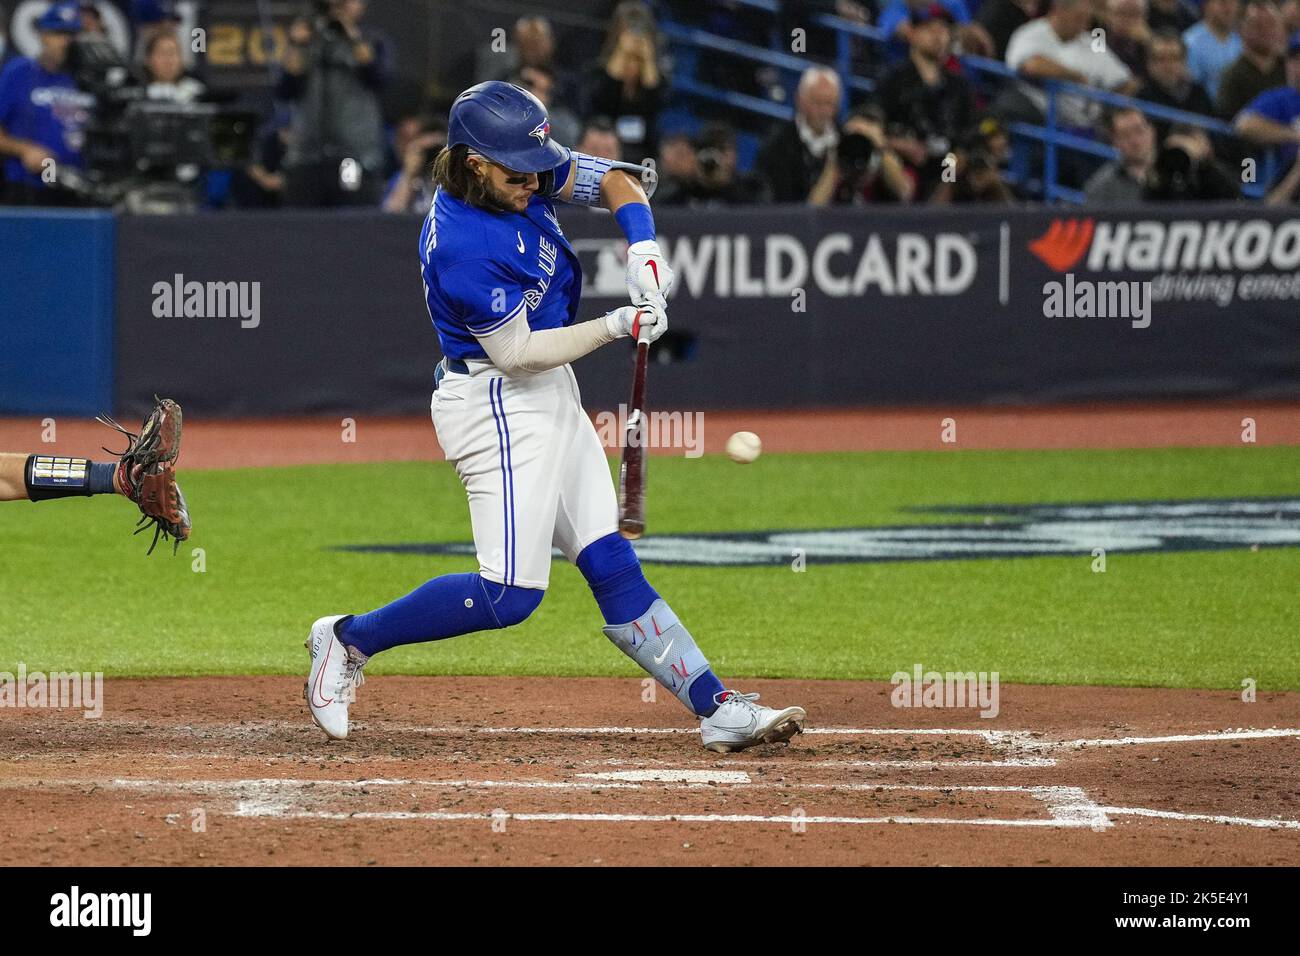 Bo Bichette of the Toronto Blue Jays runs to the dugout after playing  Photo d'actualité - Getty Images